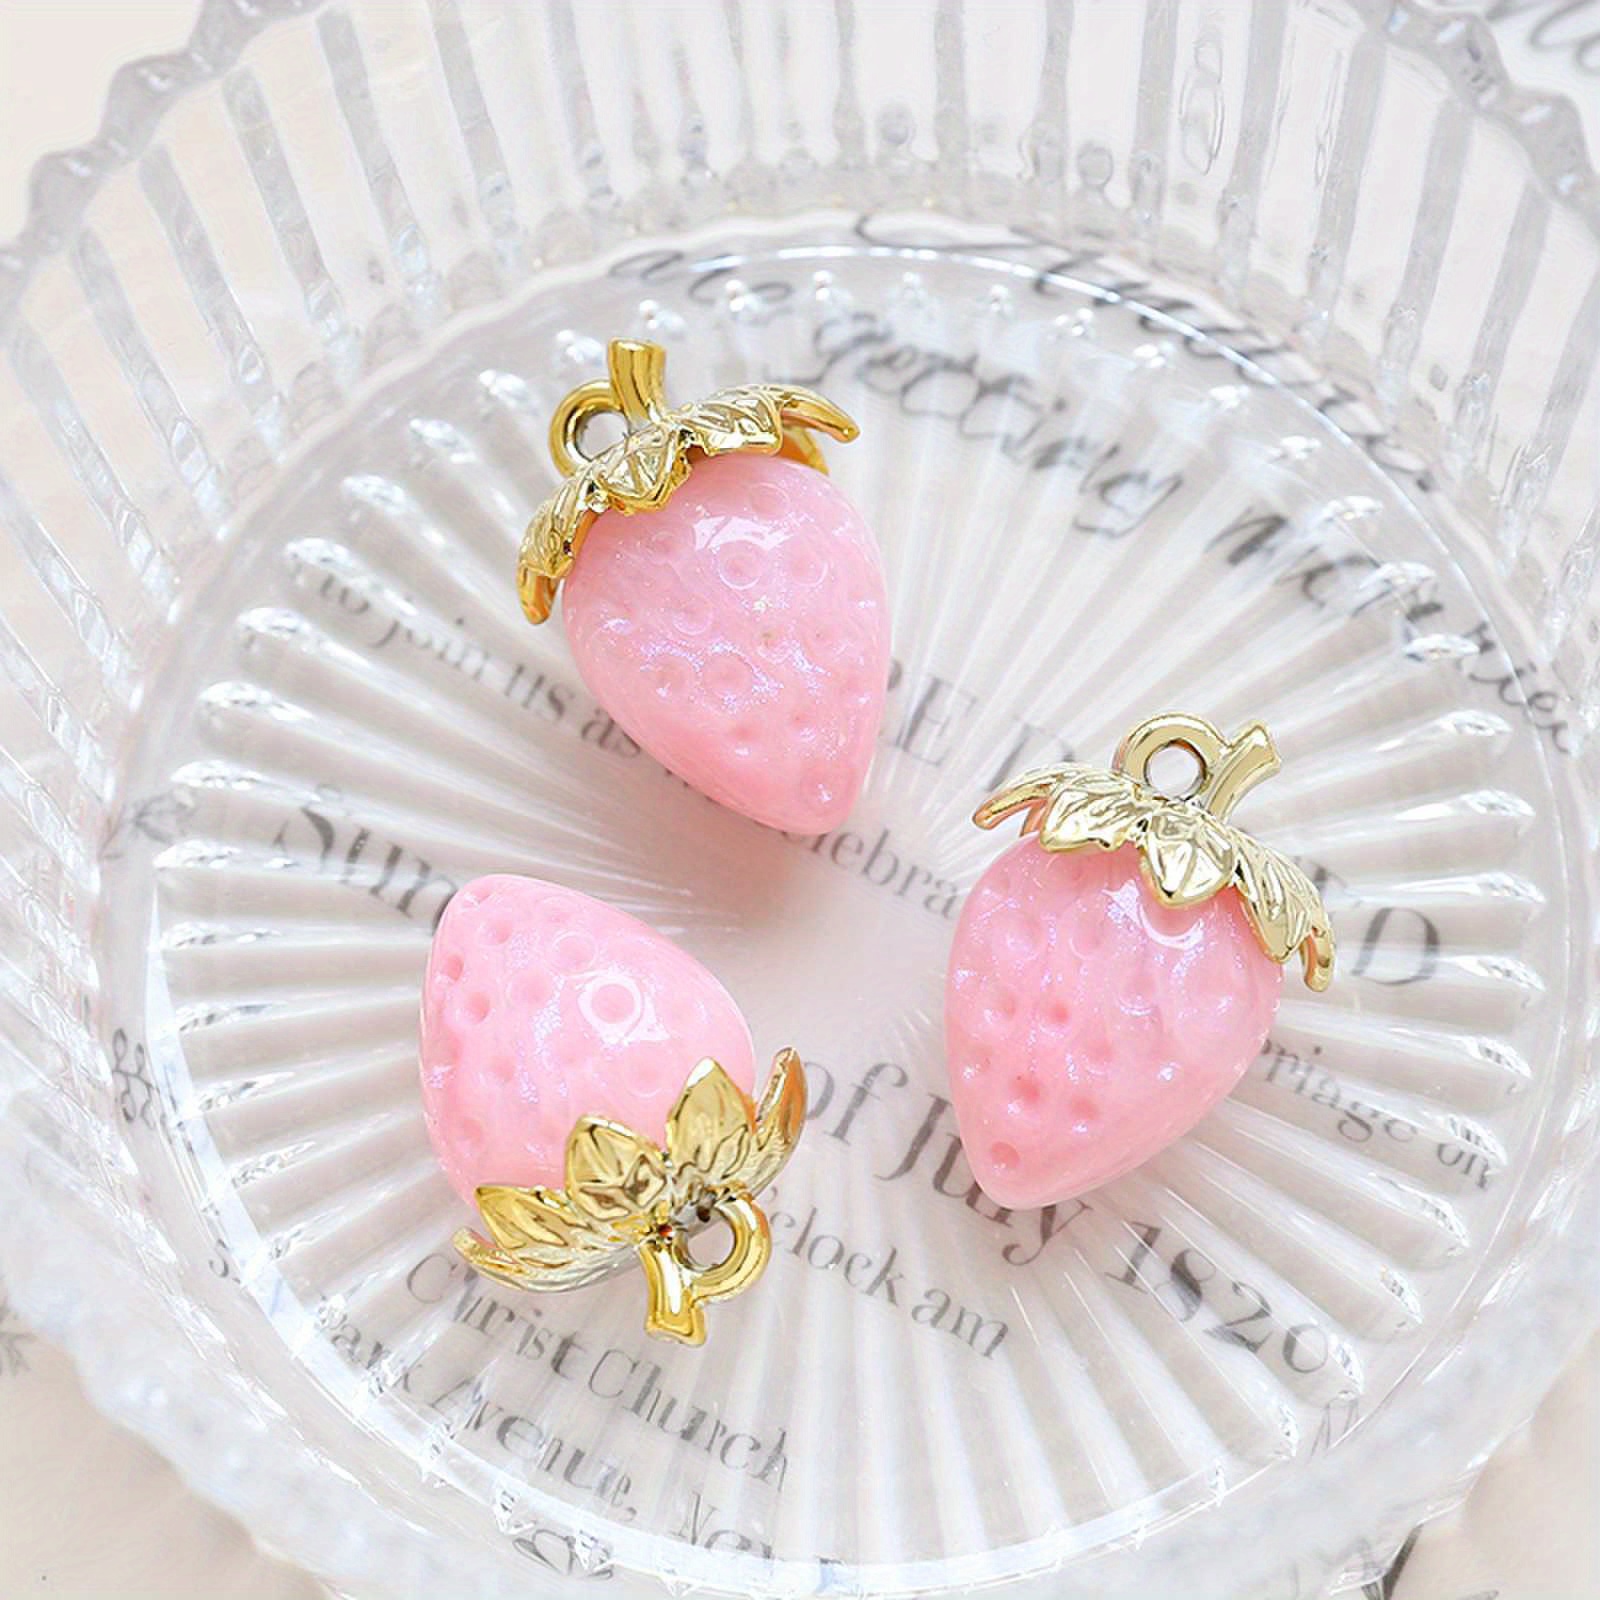 Rose Gold Strawberry Charms Fruit Charms Strawberries Charm Food Charms Necklace Bracelet Earrings DIY Jewelry Making 16mm x 10mm